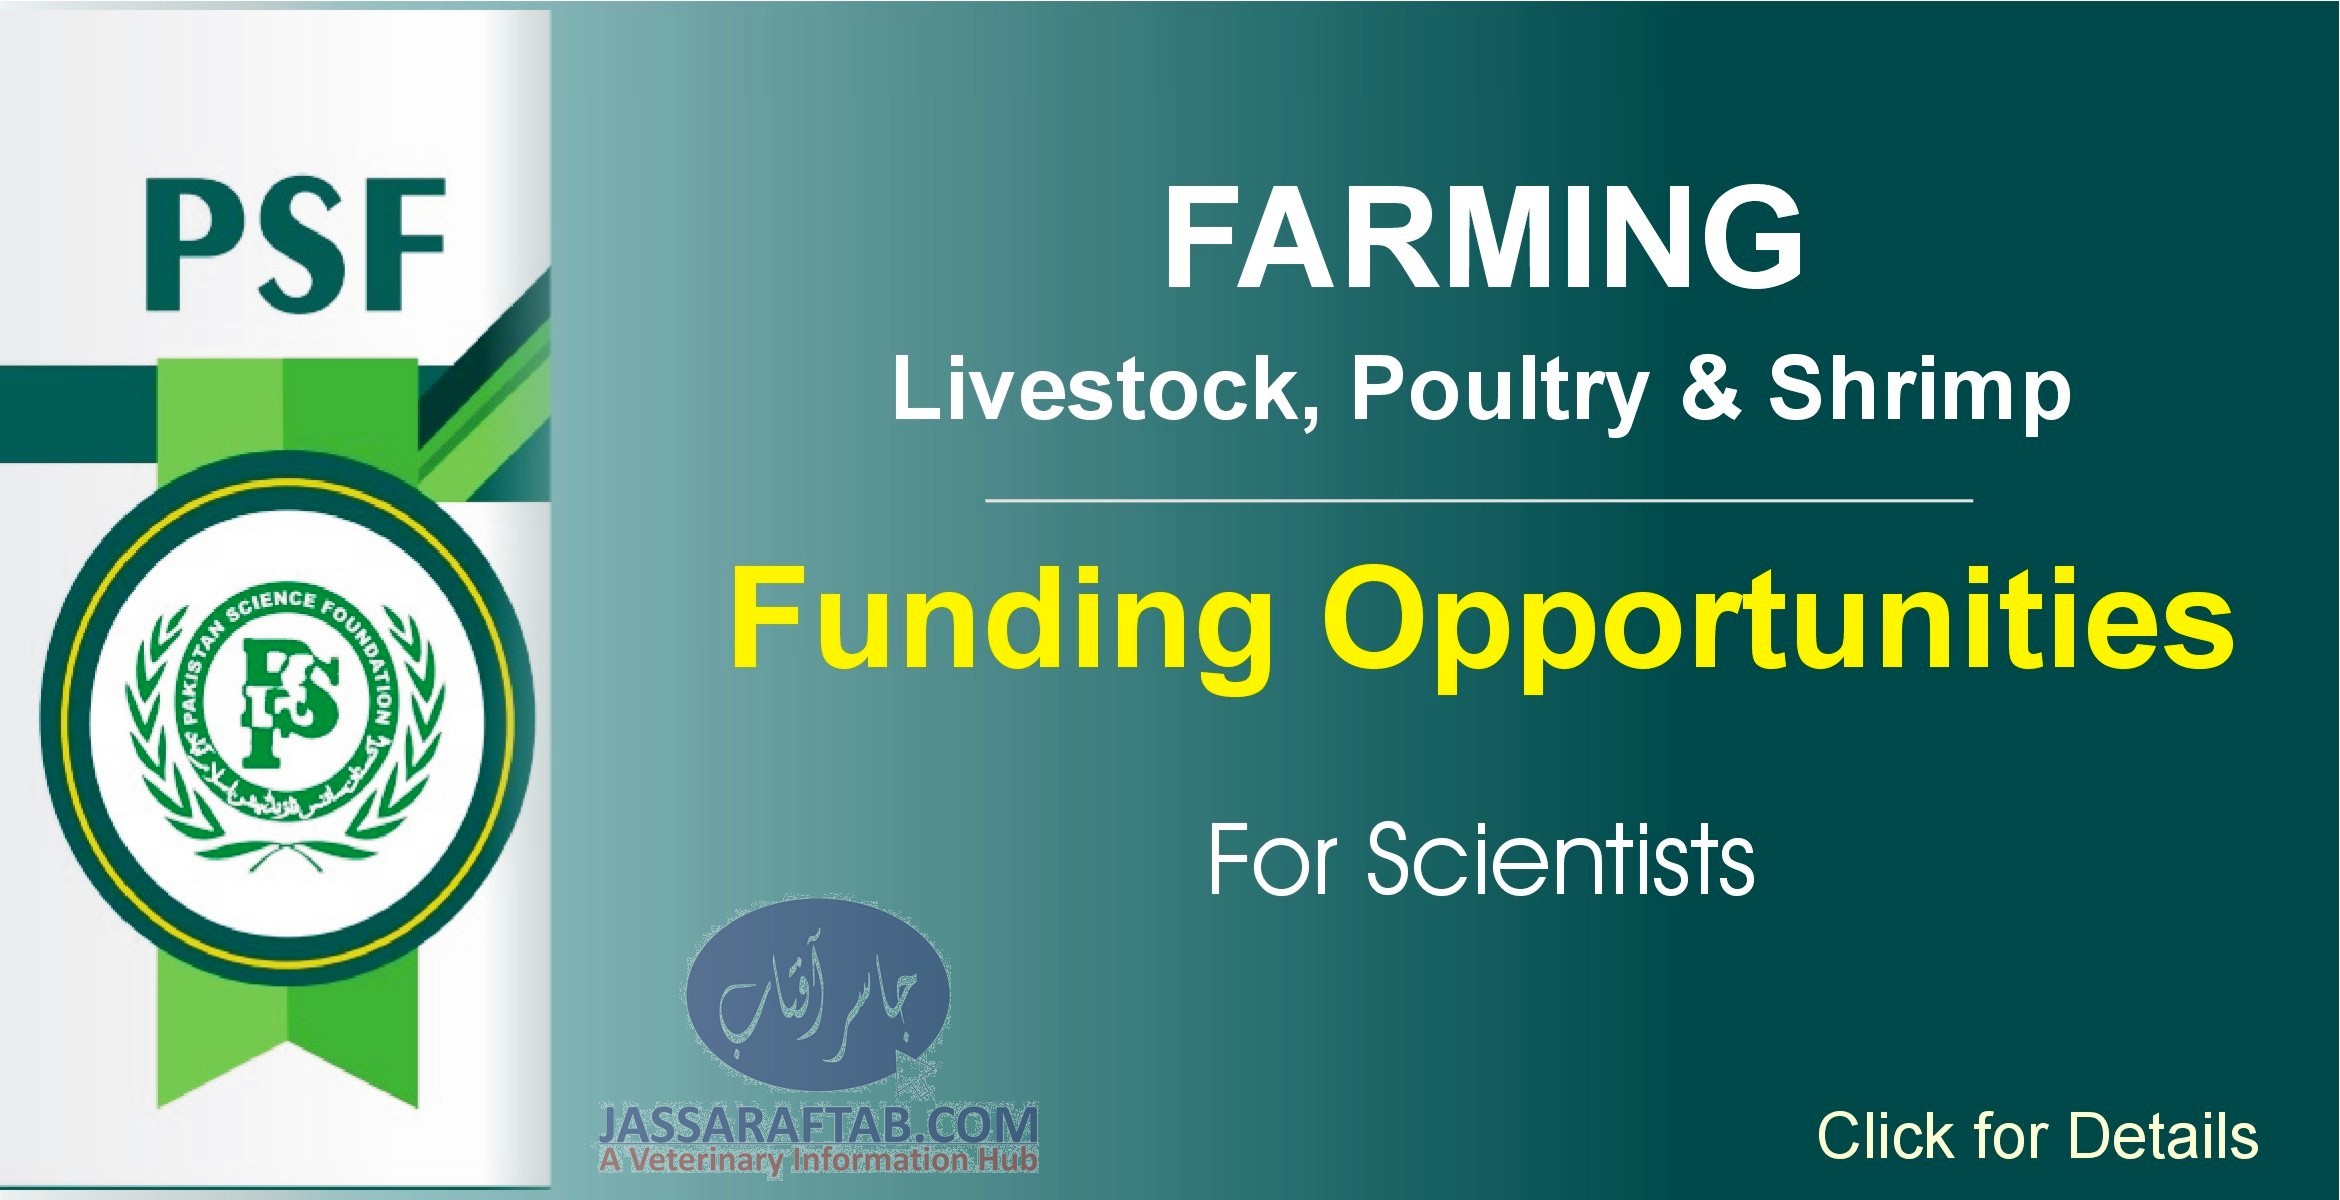 PSF Funding